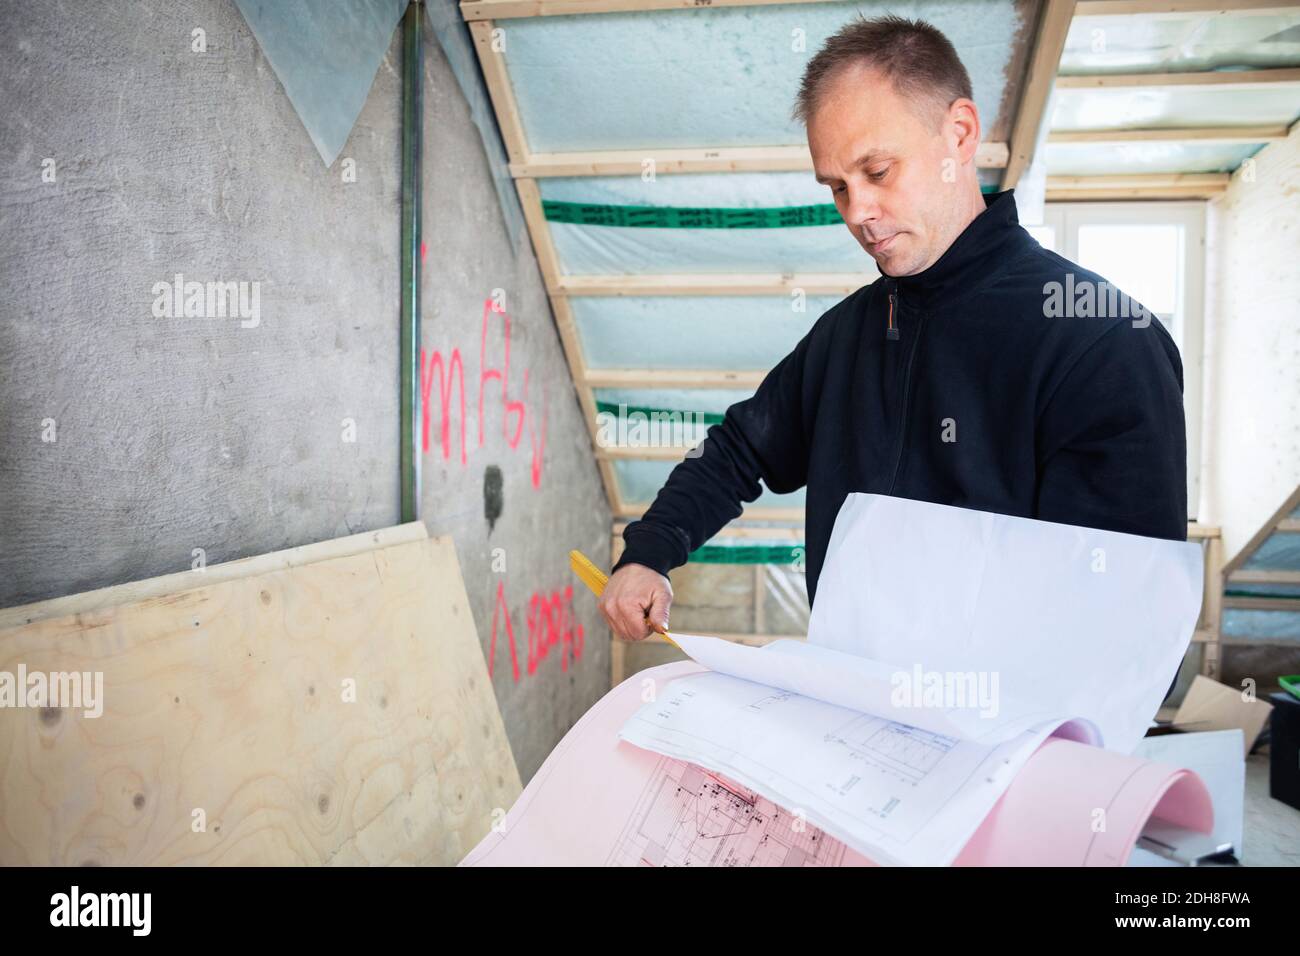 Serious manual worker reading blue prints while standing at construction site Stock Photo